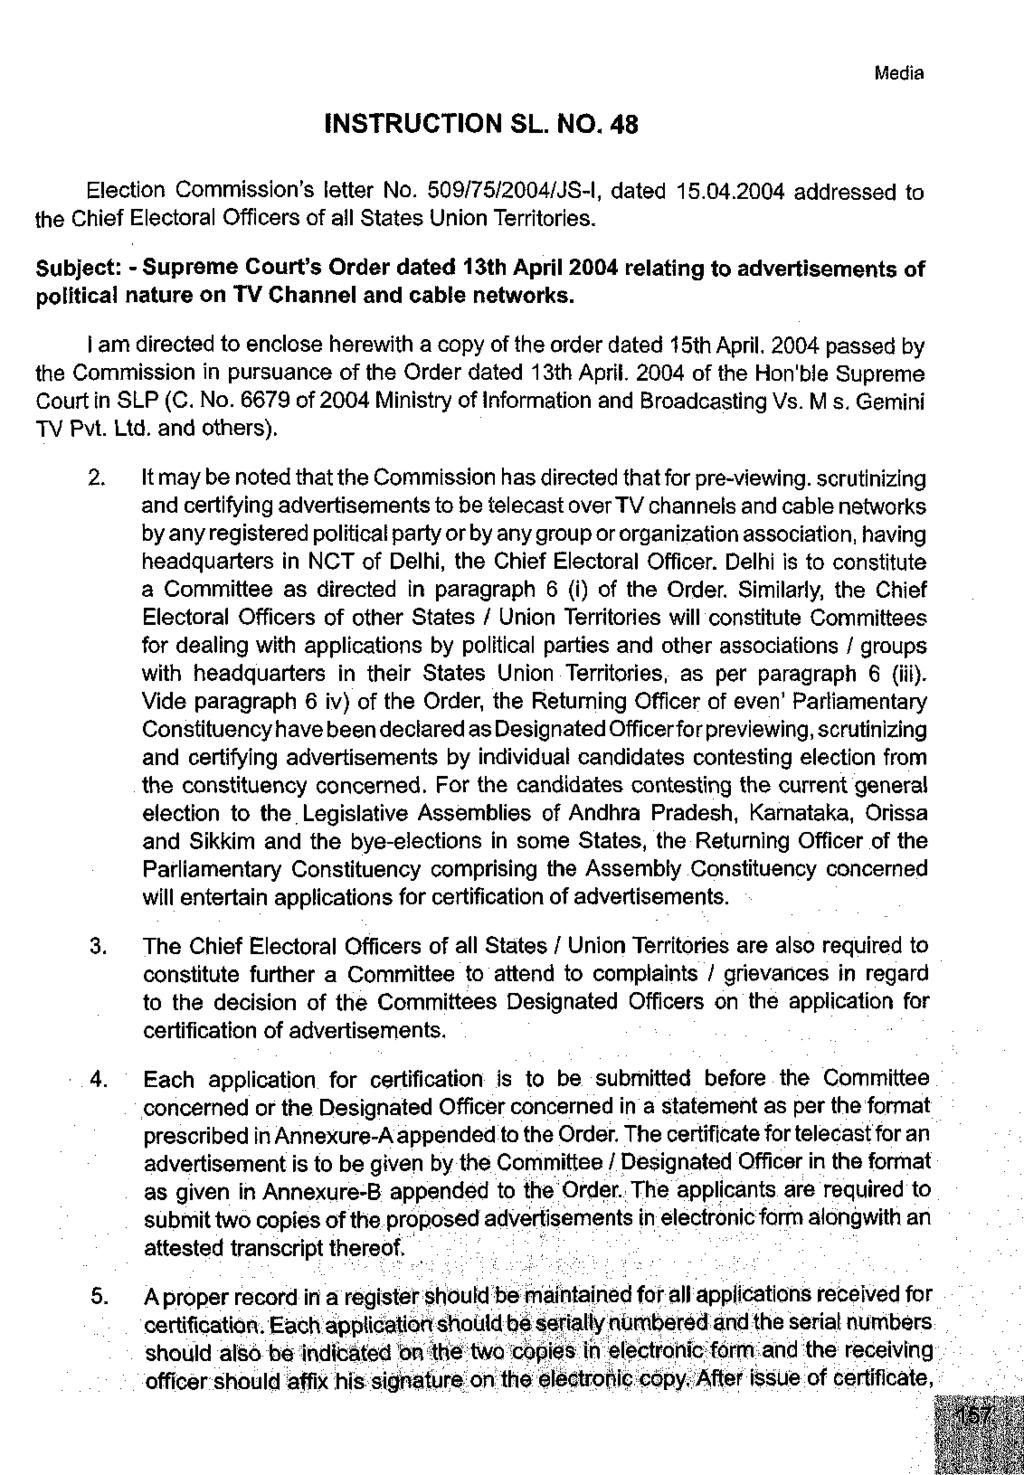 Media INSTRUCTION SL. NO. 48 Election Commission's letter No. 509/75/2004/JS-l, dated 15.04.2004 addressed to the Chief Electoral Officers of all States Union Territories.